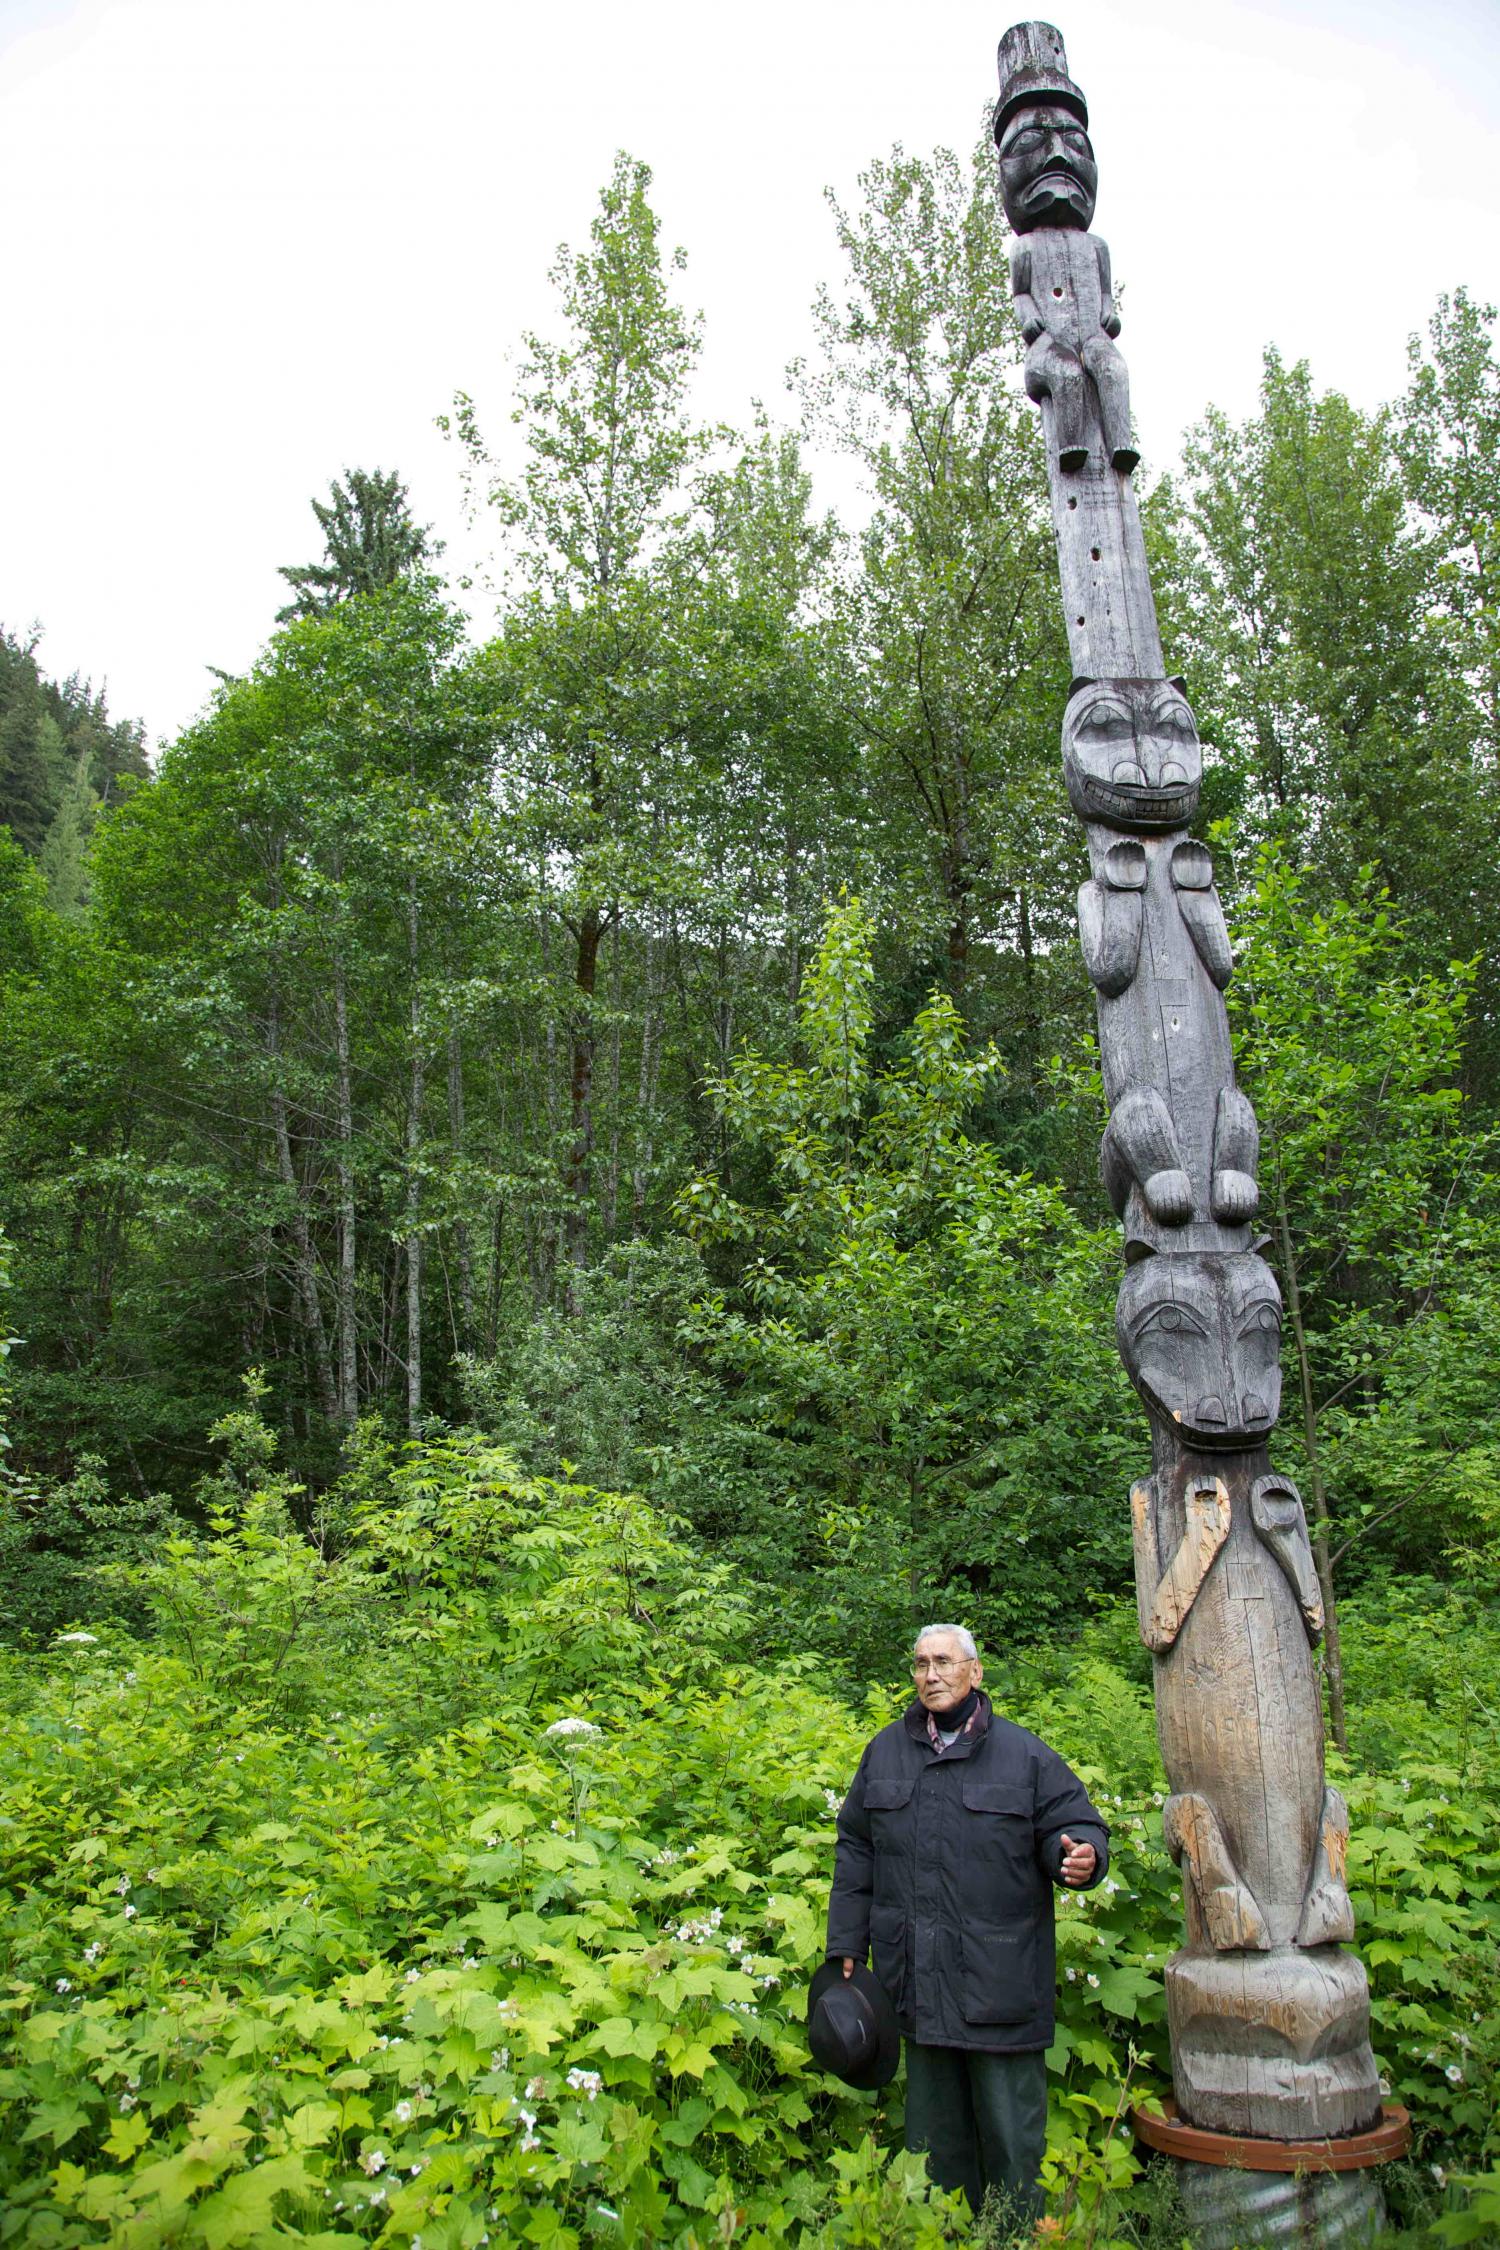 Cecil Paul speaks in front of the G’psgolox totem pole.